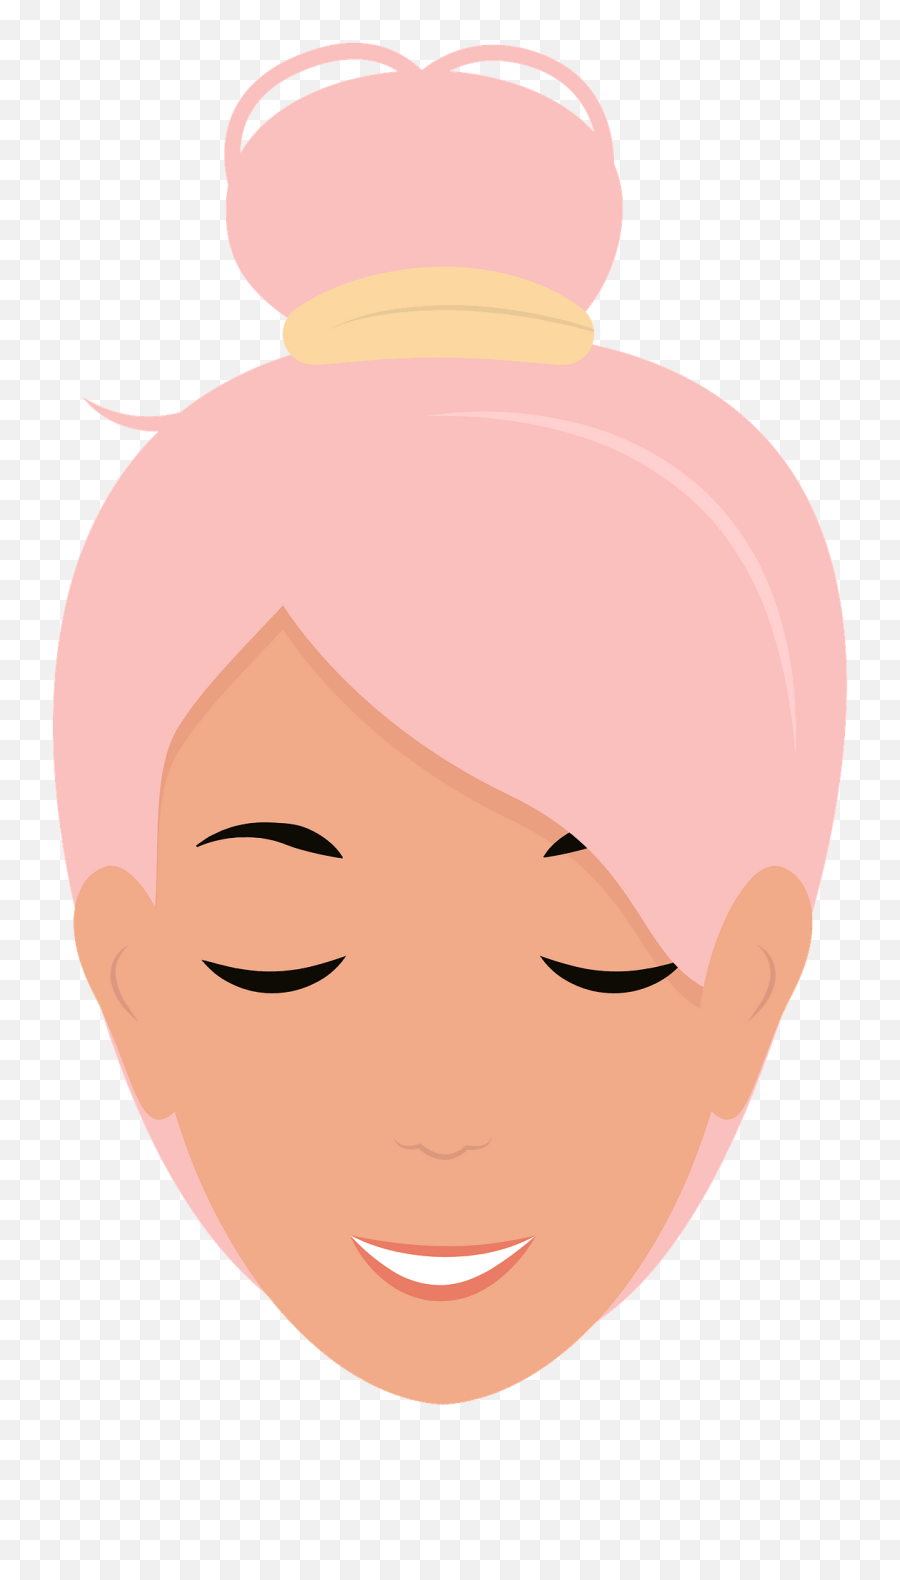 Blonde Girl Head With Closed Eyes Clipart Free Download Emoji,Closed Eyes Clipart